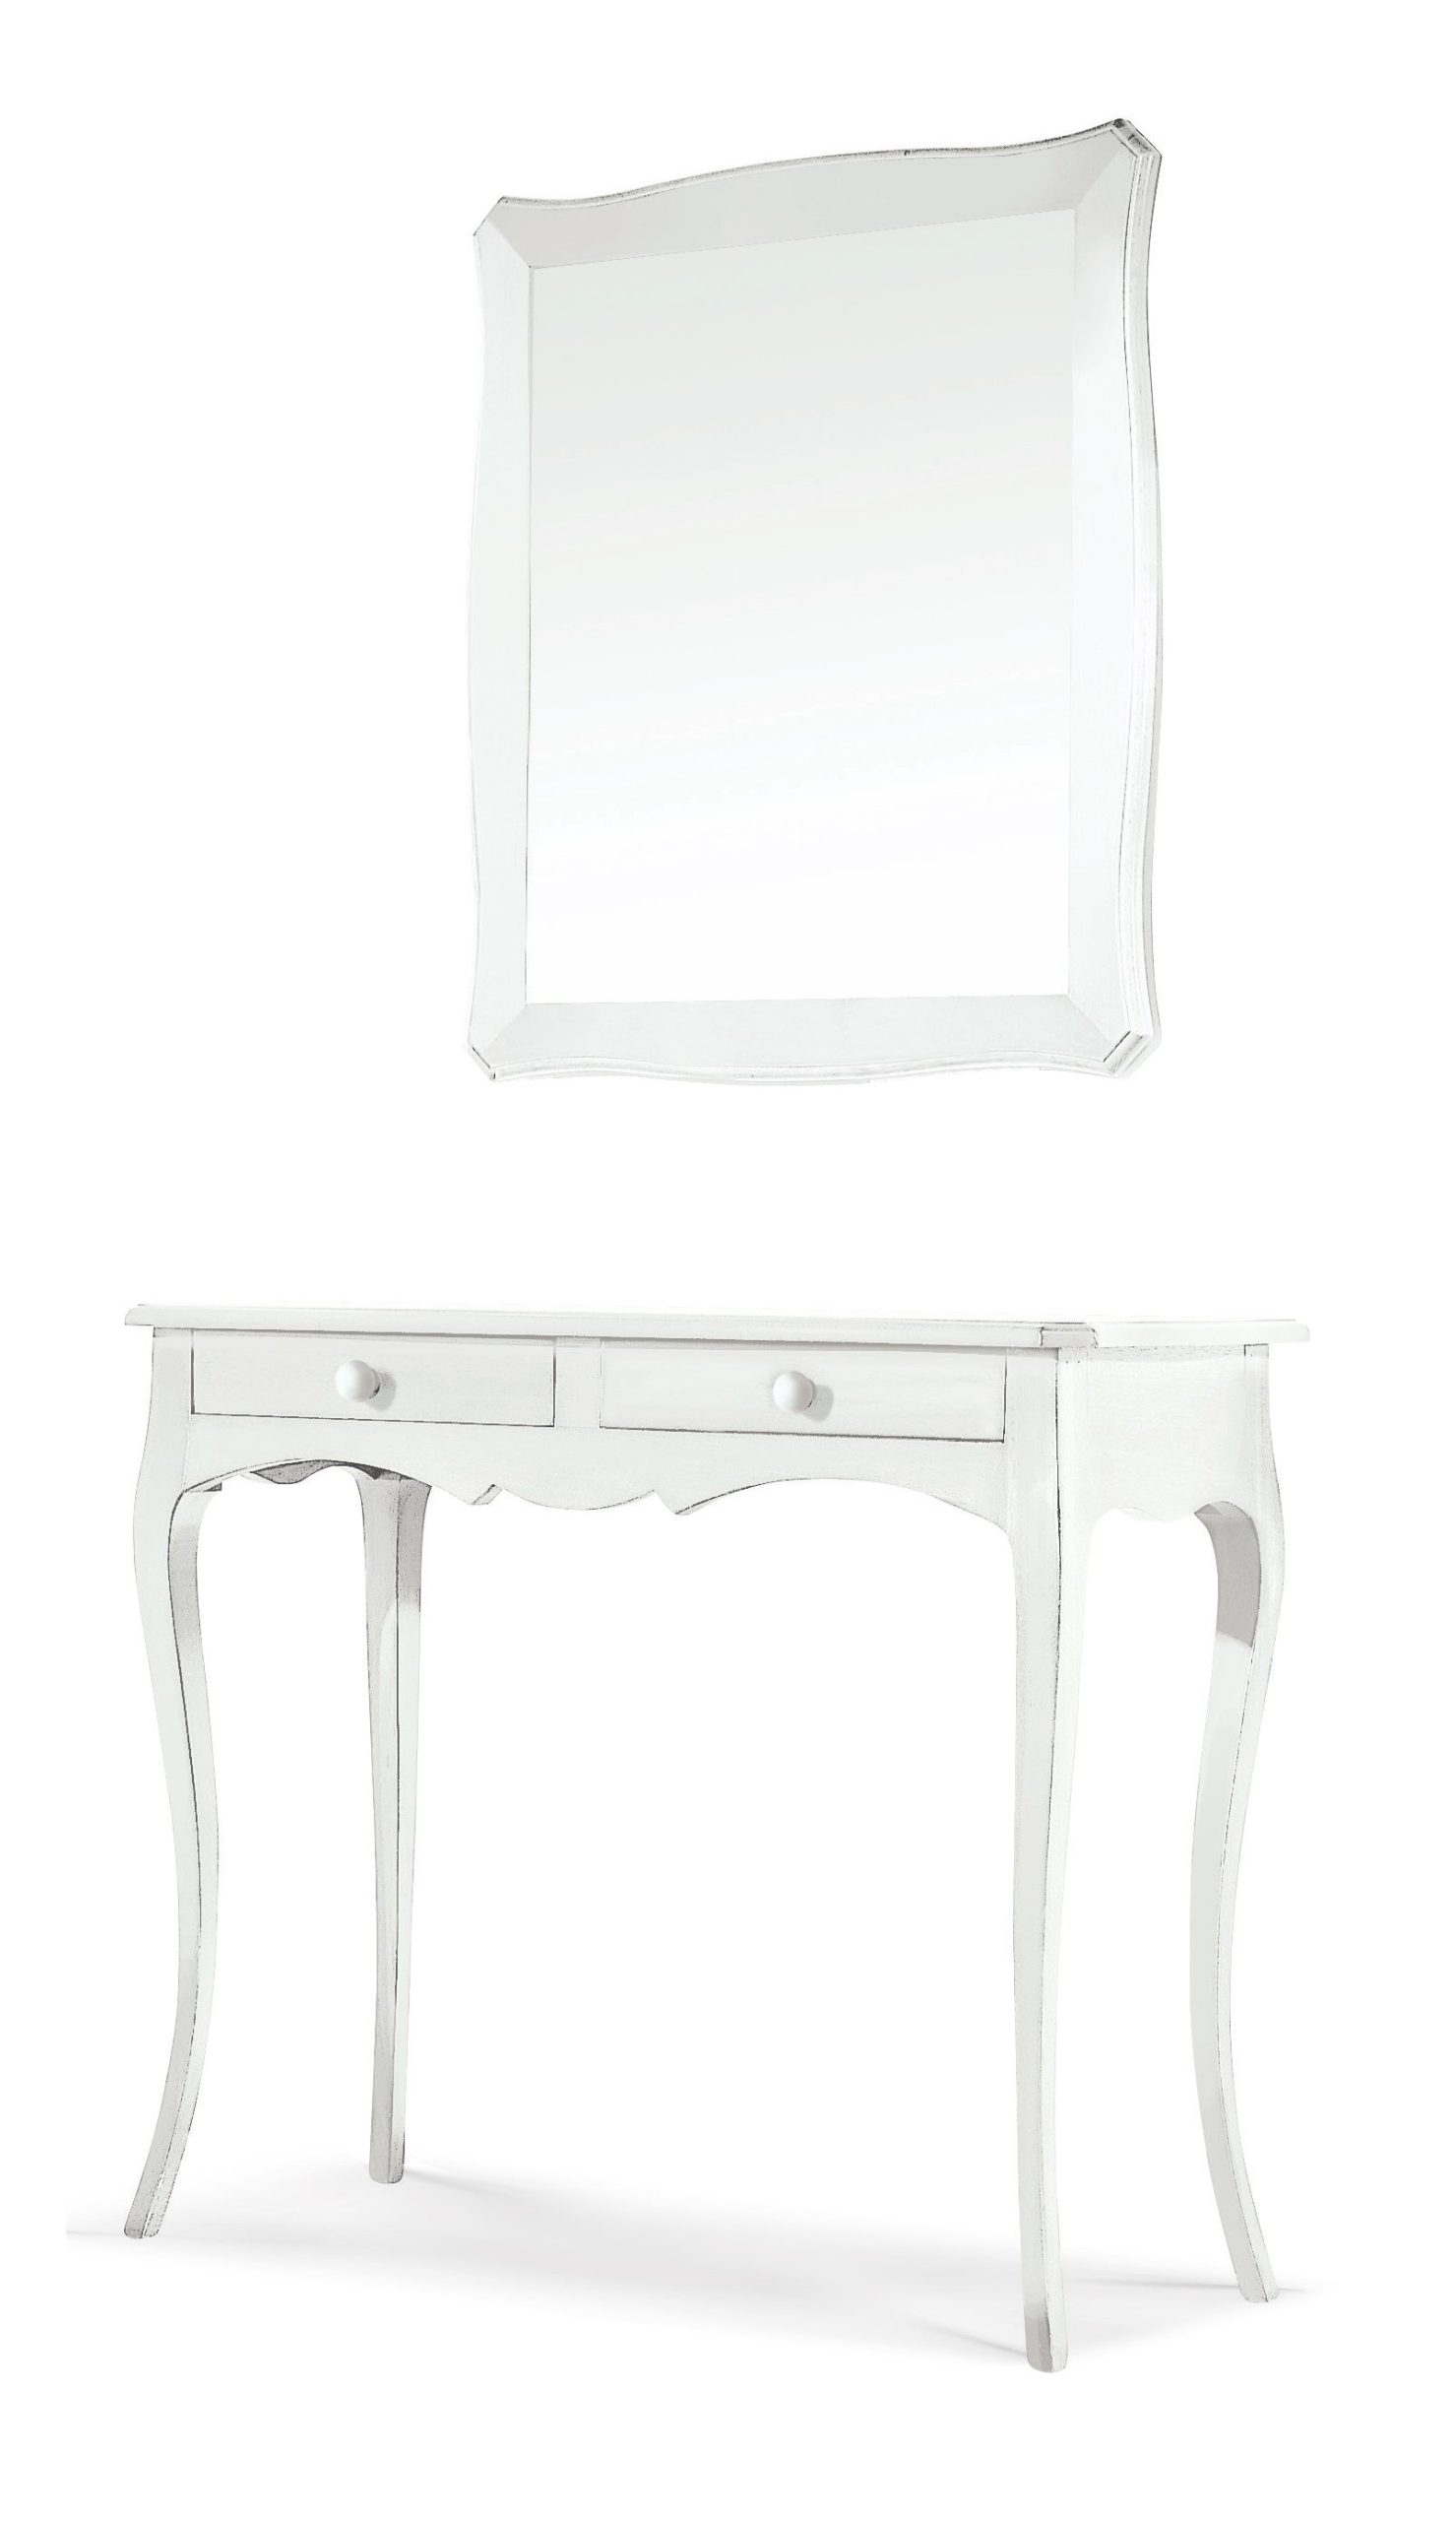 Furniture model Marilyn classic style console table with mirror color matte white walnut gloss gold and silver